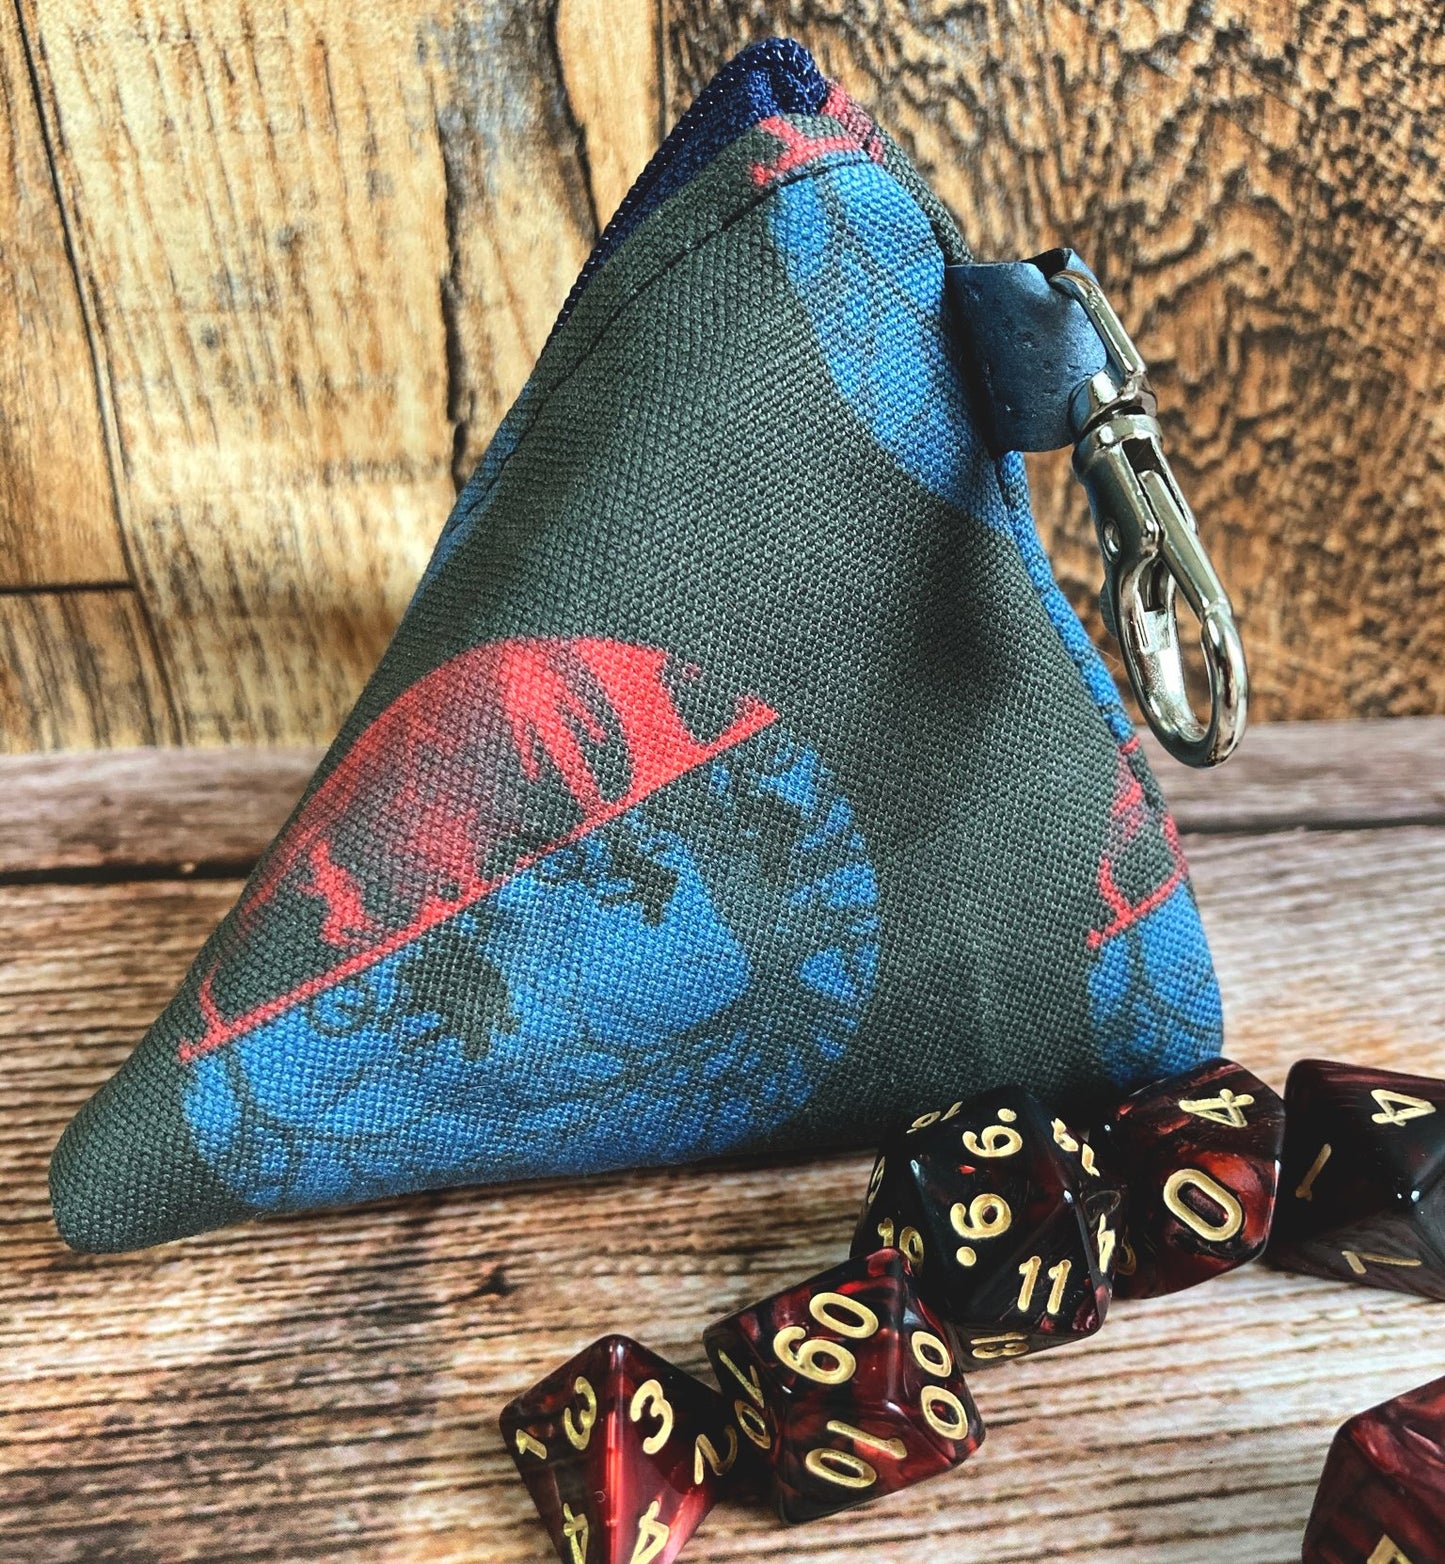 Upside Down 4 Sided Pyramid Dice and Trinket Bag